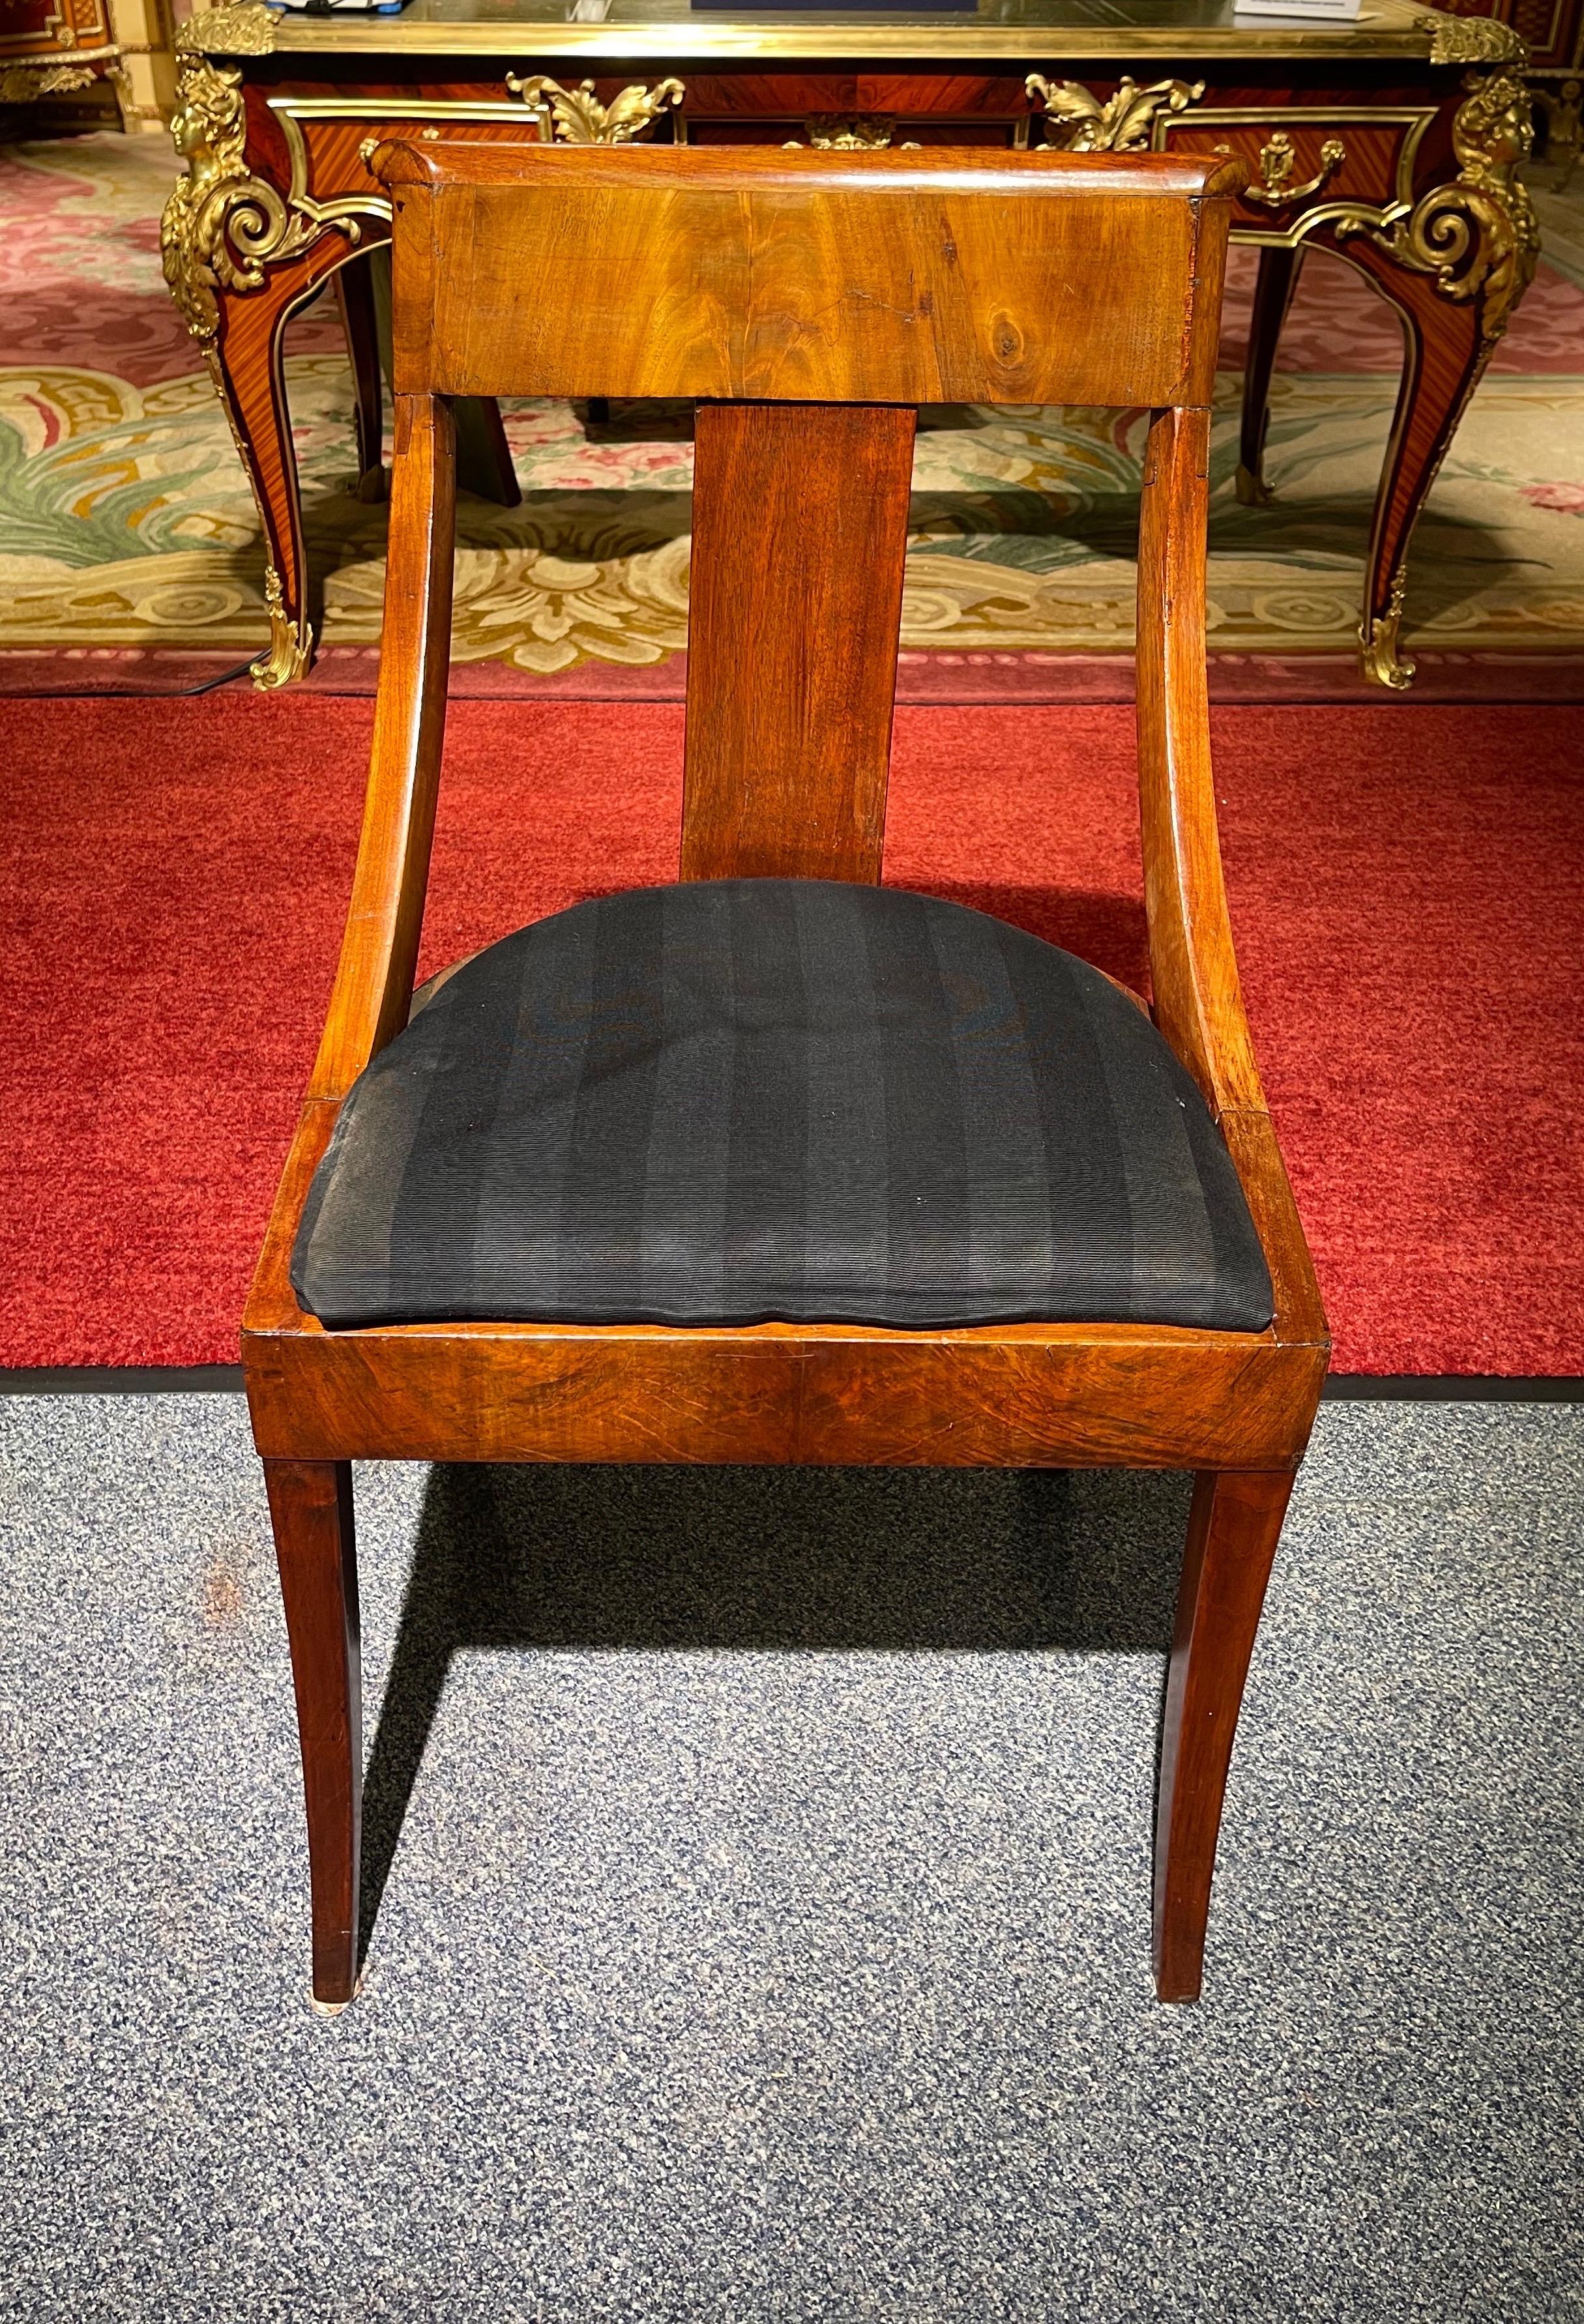 Antique Empire chairs from around 1900

Solid wood mahogany. Seat upholstered and covered with black fabric. Very stable and robust built. Hind legs in classic Empire saber shape. Timeless and classic design.